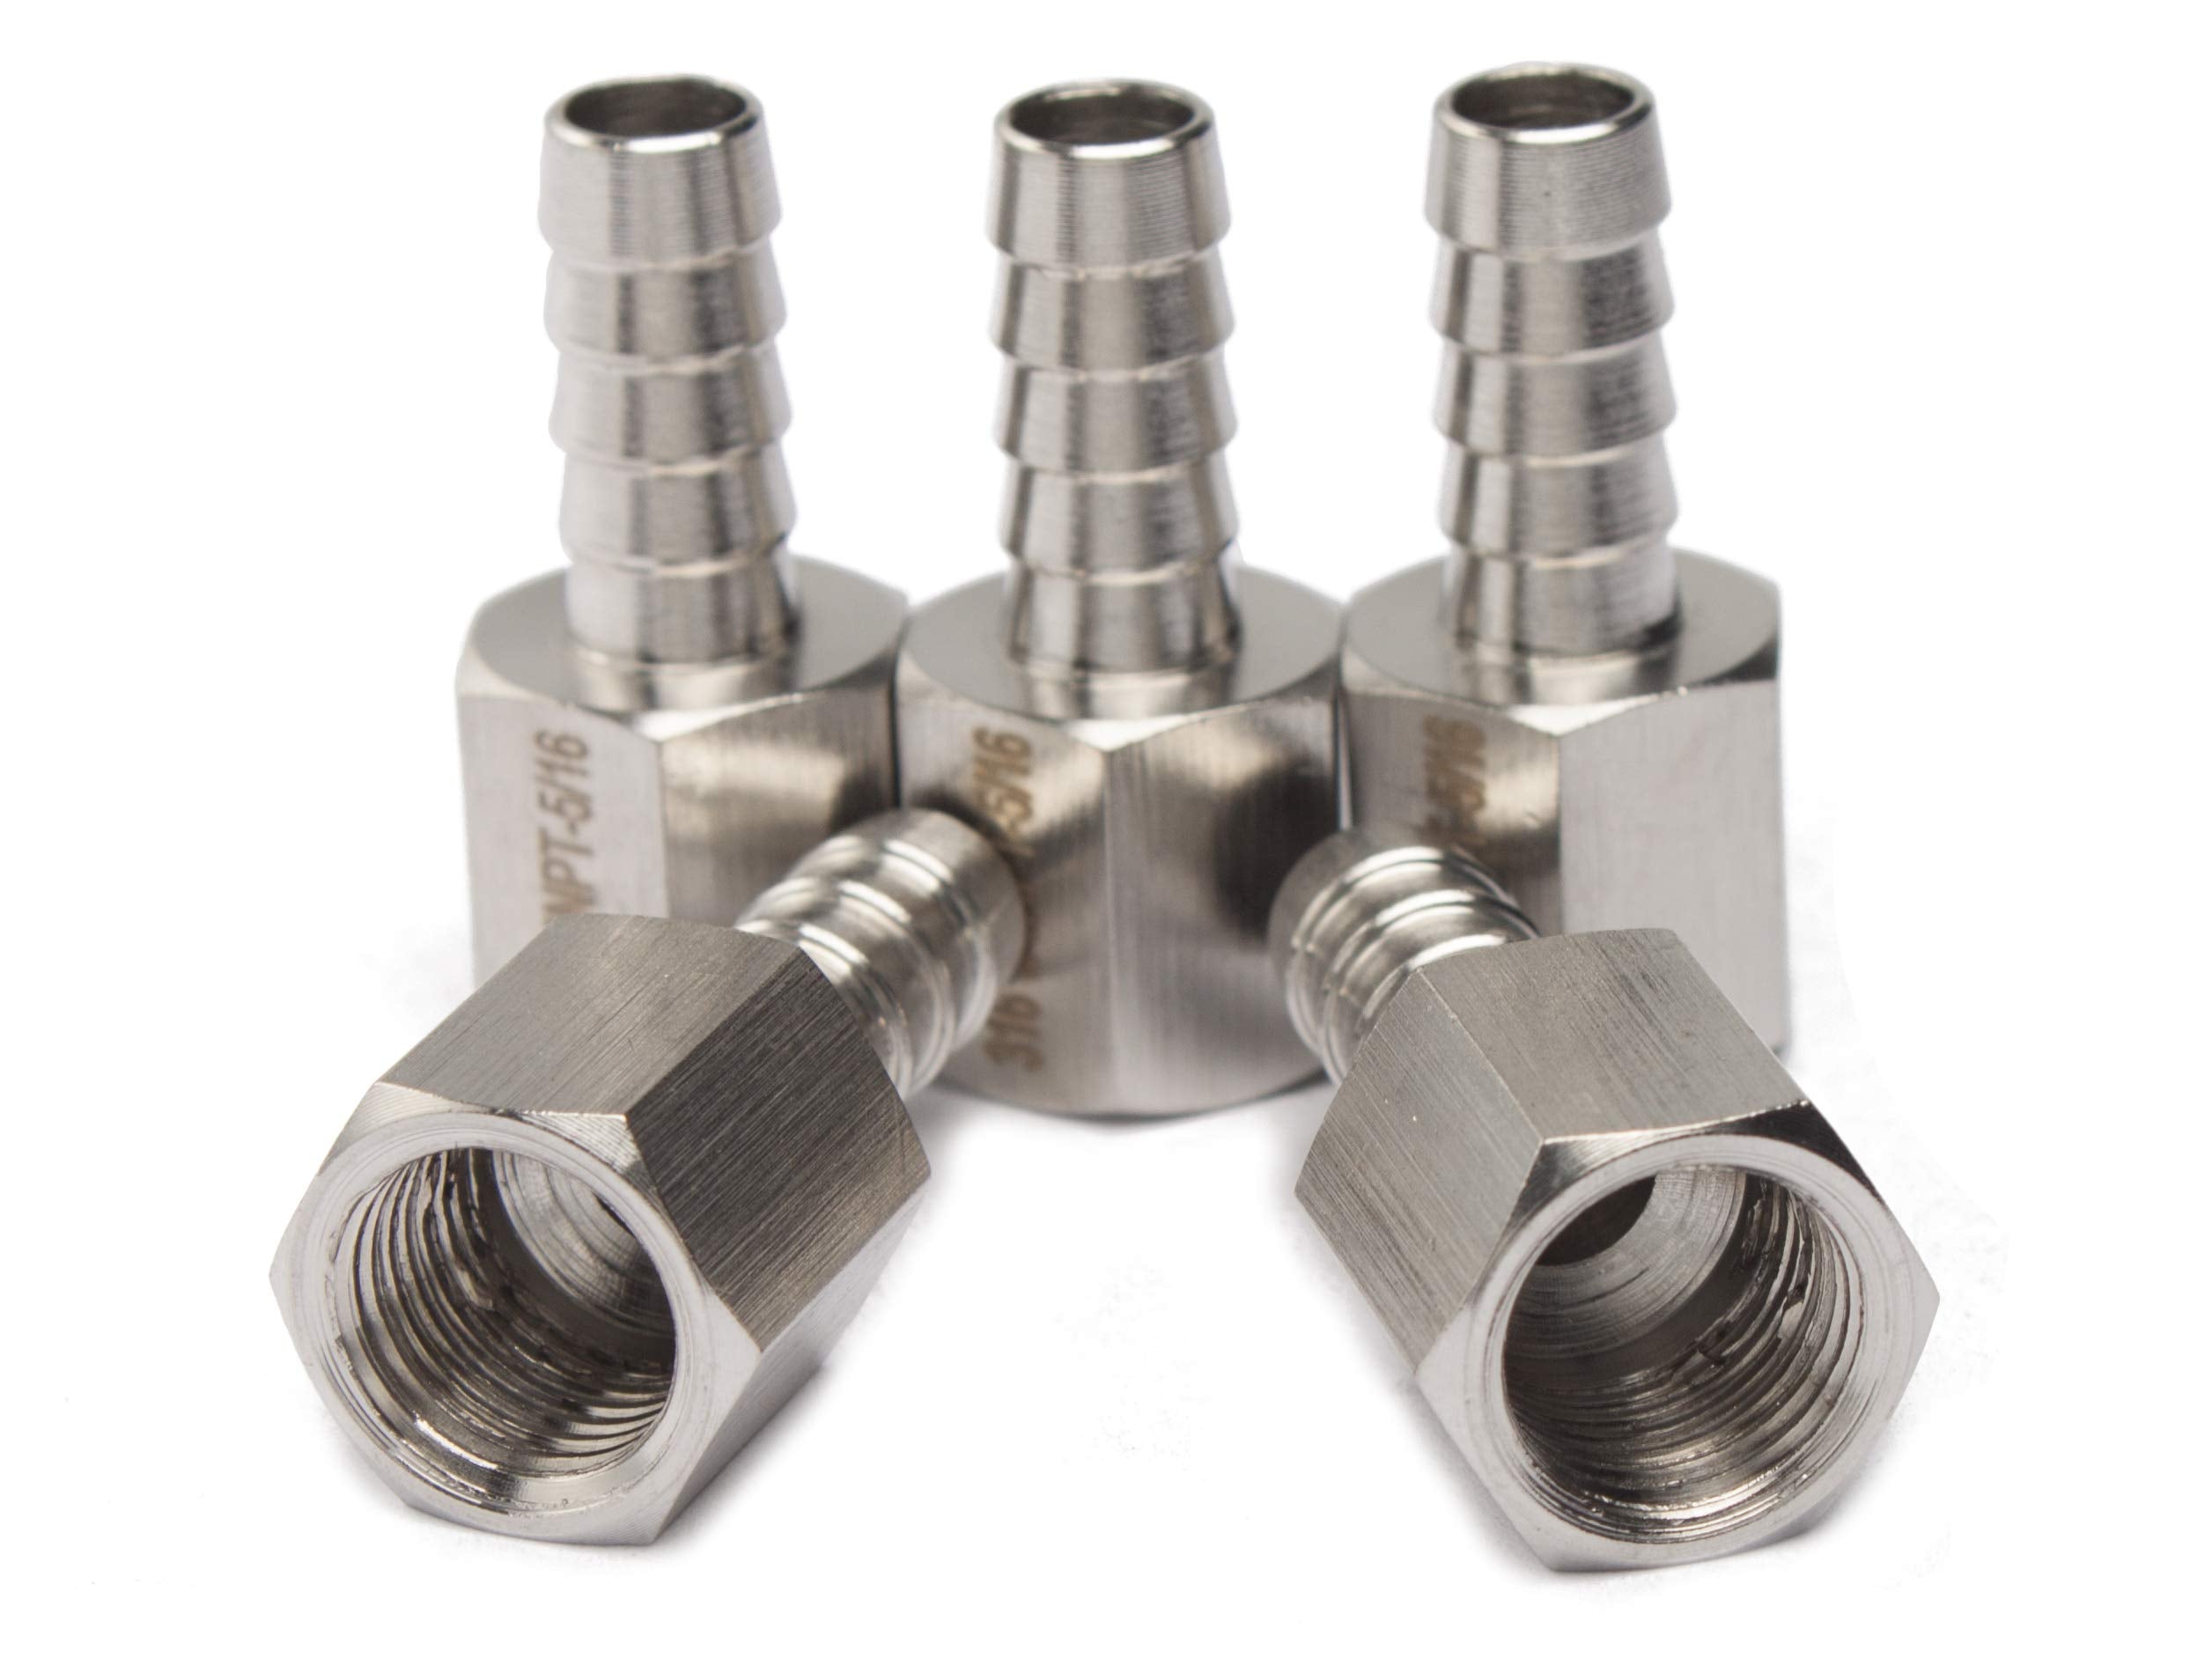 LTWFITTING Bar Production Stainless Steel 316 Barb Fitting Coupler 5/16 Inch Hose ID x 1/4 Inch Female NPT Air Fuel Water (Pack of 5)